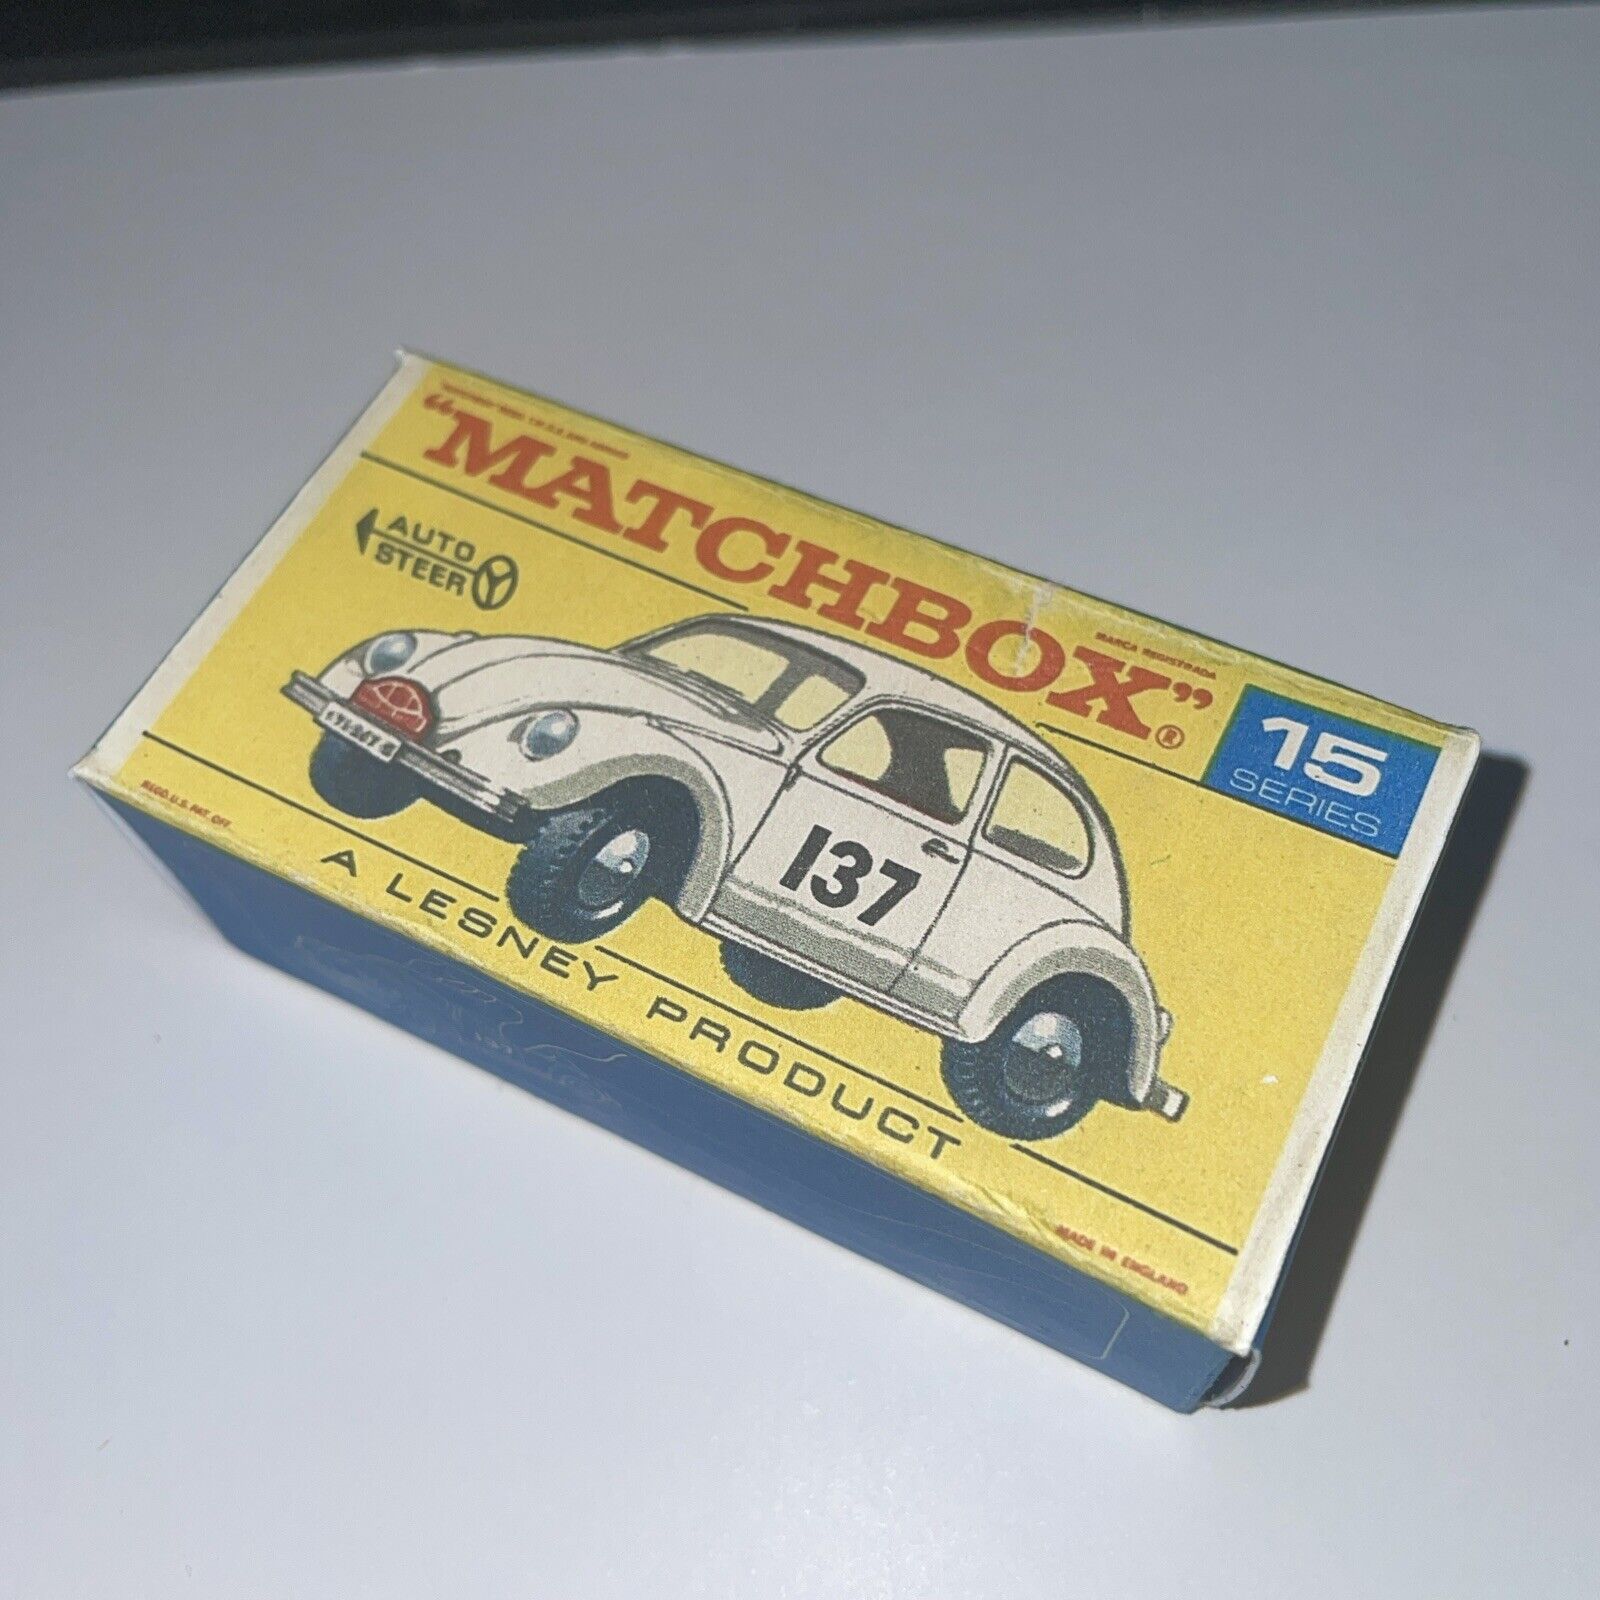 Matchbox Lesney No.15 Volkswagen Beetle 1500 Saloon F type Reproduction Box only